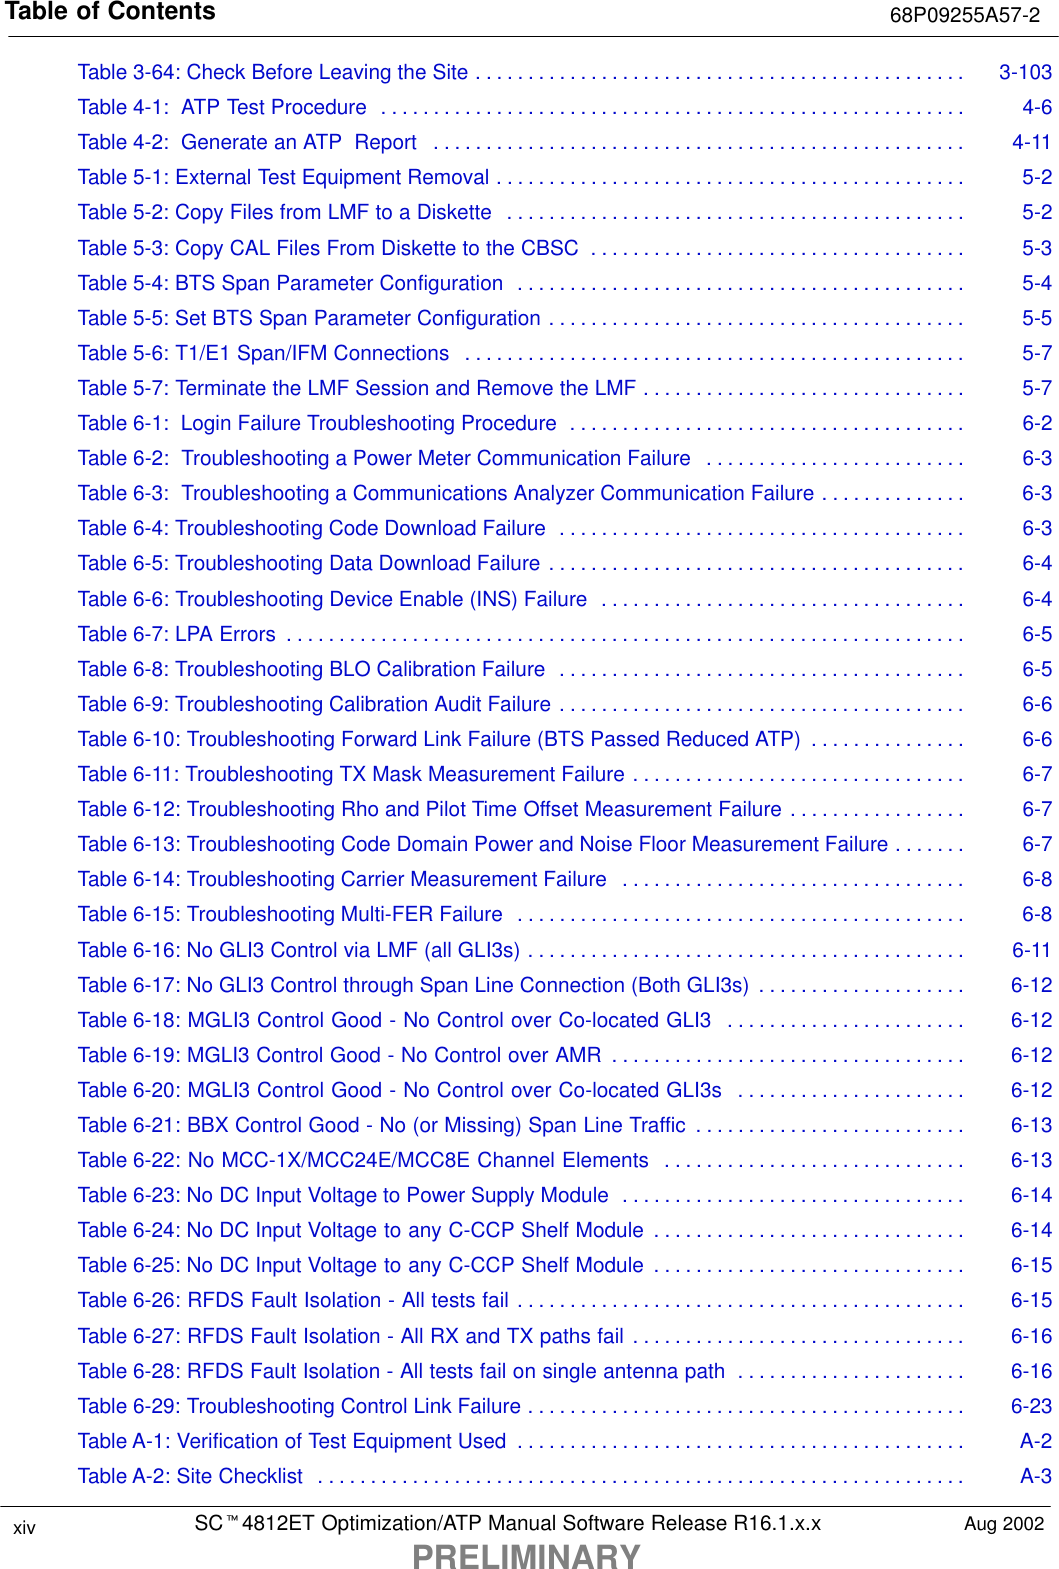 Table of Contents 68P09255A57-2SCt4812ET Optimization/ATP Manual Software Release R16.1.x.xPRELIMINARYxiv Aug 2002Table 3-64: Check Before Leaving the Site 3-103. . . . . . . . . . . . . . . . . . . . . . . . . . . . . . . . . . . . . . . . . . . . . . . Table 4-1:  ATP Test Procedure 4-6. . . . . . . . . . . . . . . . . . . . . . . . . . . . . . . . . . . . . . . . . . . . . . . . . . . . . . . . Table 4-2:  Generate an ATP  Report  4-11. . . . . . . . . . . . . . . . . . . . . . . . . . . . . . . . . . . . . . . . . . . . . . . . . . . Table 5-1: External Test Equipment Removal 5-2. . . . . . . . . . . . . . . . . . . . . . . . . . . . . . . . . . . . . . . . . . . . . Table 5-2: Copy Files from LMF to a Diskette 5-2. . . . . . . . . . . . . . . . . . . . . . . . . . . . . . . . . . . . . . . . . . . . Table 5-3: Copy CAL Files From Diskette to the CBSC 5-3. . . . . . . . . . . . . . . . . . . . . . . . . . . . . . . . . . . . Table 5-4: BTS Span Parameter Configuration 5-4. . . . . . . . . . . . . . . . . . . . . . . . . . . . . . . . . . . . . . . . . . . Table 5-5: Set BTS Span Parameter Configuration 5-5. . . . . . . . . . . . . . . . . . . . . . . . . . . . . . . . . . . . . . . . Table 5-6: T1/E1 Span/IFM Connections 5-7. . . . . . . . . . . . . . . . . . . . . . . . . . . . . . . . . . . . . . . . . . . . . . . . Table 5-7: Terminate the LMF Session and Remove the LMF 5-7. . . . . . . . . . . . . . . . . . . . . . . . . . . . . . . Table 6-1:  Login Failure Troubleshooting Procedure 6-2. . . . . . . . . . . . . . . . . . . . . . . . . . . . . . . . . . . . . . Table 6-2:  Troubleshooting a Power Meter Communication Failure 6-3. . . . . . . . . . . . . . . . . . . . . . . . . Table 6-3:  Troubleshooting a Communications Analyzer Communication Failure 6-3. . . . . . . . . . . . . . Table 6-4: Troubleshooting Code Download Failure 6-3. . . . . . . . . . . . . . . . . . . . . . . . . . . . . . . . . . . . . . . Table 6-5: Troubleshooting Data Download Failure 6-4. . . . . . . . . . . . . . . . . . . . . . . . . . . . . . . . . . . . . . . . Table 6-6: Troubleshooting Device Enable (INS) Failure 6-4. . . . . . . . . . . . . . . . . . . . . . . . . . . . . . . . . . . Table 6-7: LPA Errors 6-5. . . . . . . . . . . . . . . . . . . . . . . . . . . . . . . . . . . . . . . . . . . . . . . . . . . . . . . . . . . . . . . . . Table 6-8: Troubleshooting BLO Calibration Failure 6-5. . . . . . . . . . . . . . . . . . . . . . . . . . . . . . . . . . . . . . . Table 6-9: Troubleshooting Calibration Audit Failure 6-6. . . . . . . . . . . . . . . . . . . . . . . . . . . . . . . . . . . . . . . Table 6-10: Troubleshooting Forward Link Failure (BTS Passed Reduced ATP) 6-6. . . . . . . . . . . . . . . Table 6-11: Troubleshooting TX Mask Measurement Failure 6-7. . . . . . . . . . . . . . . . . . . . . . . . . . . . . . . . Table 6-12: Troubleshooting Rho and Pilot Time Offset Measurement Failure 6-7. . . . . . . . . . . . . . . . . Table 6-13: Troubleshooting Code Domain Power and Noise Floor Measurement Failure 6-7. . . . . . . Table 6-14: Troubleshooting Carrier Measurement Failure 6-8. . . . . . . . . . . . . . . . . . . . . . . . . . . . . . . . . Table 6-15: Troubleshooting Multi-FER Failure 6-8. . . . . . . . . . . . . . . . . . . . . . . . . . . . . . . . . . . . . . . . . . . Table 6-16: No GLI3 Control via LMF (all GLI3s) 6-11. . . . . . . . . . . . . . . . . . . . . . . . . . . . . . . . . . . . . . . . . . Table 6-17: No GLI3 Control through Span Line Connection (Both GLI3s) 6-12. . . . . . . . . . . . . . . . . . . . Table 6-18: MGLI3 Control Good - No Control over Co-located GLI3 6-12. . . . . . . . . . . . . . . . . . . . . . . Table 6-19: MGLI3 Control Good - No Control over AMR 6-12. . . . . . . . . . . . . . . . . . . . . . . . . . . . . . . . . . Table 6-20: MGLI3 Control Good - No Control over Co-located GLI3s 6-12. . . . . . . . . . . . . . . . . . . . . . Table 6-21: BBX Control Good - No (or Missing) Span Line Traffic 6-13. . . . . . . . . . . . . . . . . . . . . . . . . . Table 6-22: No MCC-1X/MCC24E/MCC8E Channel Elements 6-13. . . . . . . . . . . . . . . . . . . . . . . . . . . . . Table 6-23: No DC Input Voltage to Power Supply Module 6-14. . . . . . . . . . . . . . . . . . . . . . . . . . . . . . . . . Table 6-24: No DC Input Voltage to any C-CCP Shelf Module 6-14. . . . . . . . . . . . . . . . . . . . . . . . . . . . . . Table 6-25: No DC Input Voltage to any C-CCP Shelf Module 6-15. . . . . . . . . . . . . . . . . . . . . . . . . . . . . . Table 6-26: RFDS Fault Isolation - All tests fail 6-15. . . . . . . . . . . . . . . . . . . . . . . . . . . . . . . . . . . . . . . . . . . Table 6-27: RFDS Fault Isolation - All RX and TX paths fail 6-16. . . . . . . . . . . . . . . . . . . . . . . . . . . . . . . . Table 6-28: RFDS Fault Isolation - All tests fail on single antenna path 6-16. . . . . . . . . . . . . . . . . . . . . . Table 6-29: Troubleshooting Control Link Failure 6-23. . . . . . . . . . . . . . . . . . . . . . . . . . . . . . . . . . . . . . . . . . Table A-1: Verification of Test Equipment Used A-2. . . . . . . . . . . . . . . . . . . . . . . . . . . . . . . . . . . . . . . . . . . Table A-2: Site Checklist A-3. . . . . . . . . . . . . . . . . . . . . . . . . . . . . . . . . . . . . . . . . . . . . . . . . . . . . . . . . . . . . . 